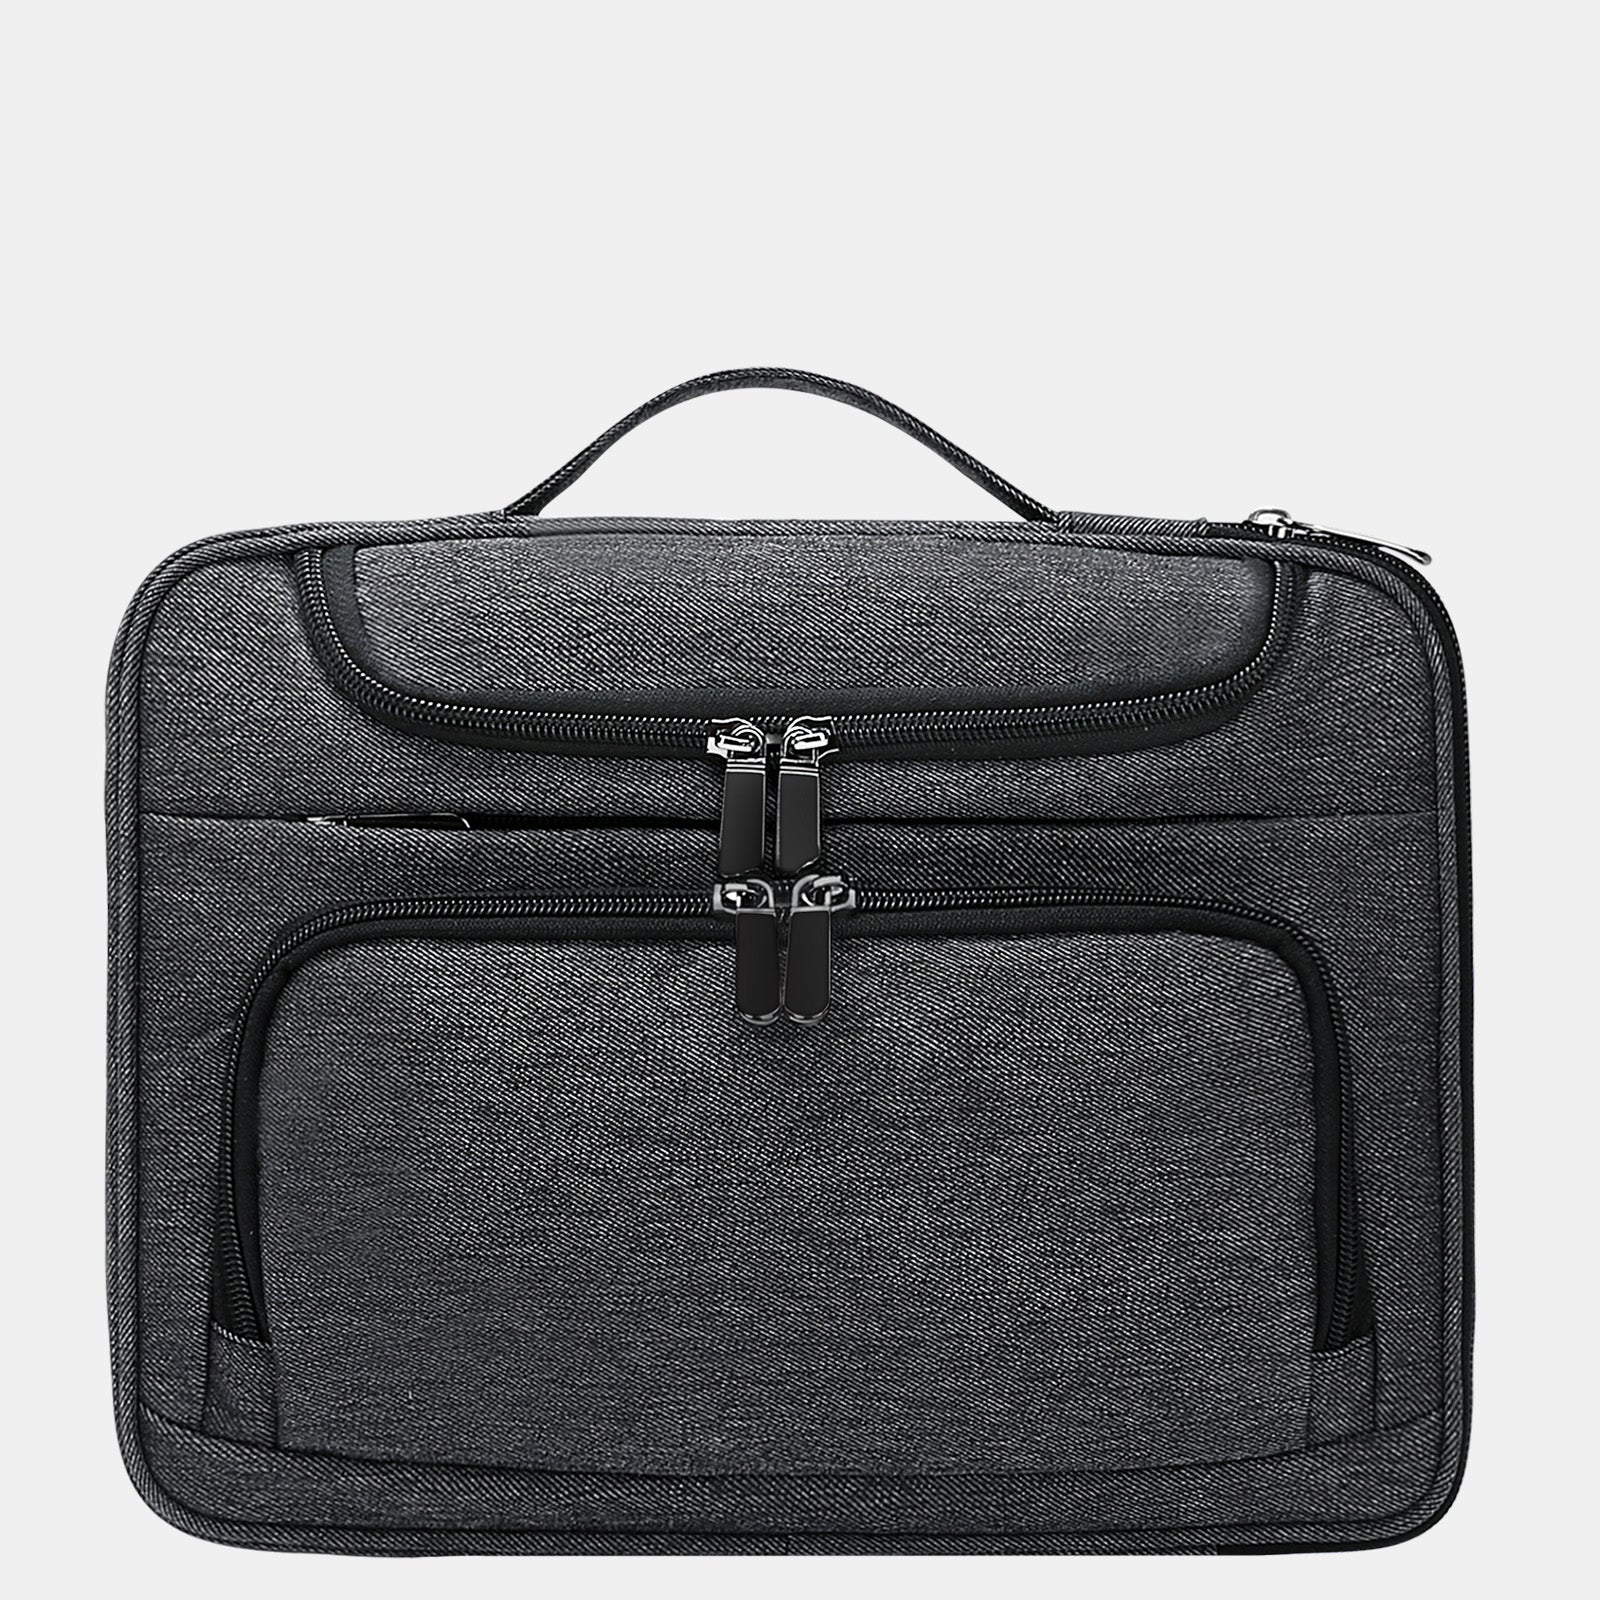 Bertasche 11 inch Tablet Sleeve Bag for iPad Carrying Briefcase